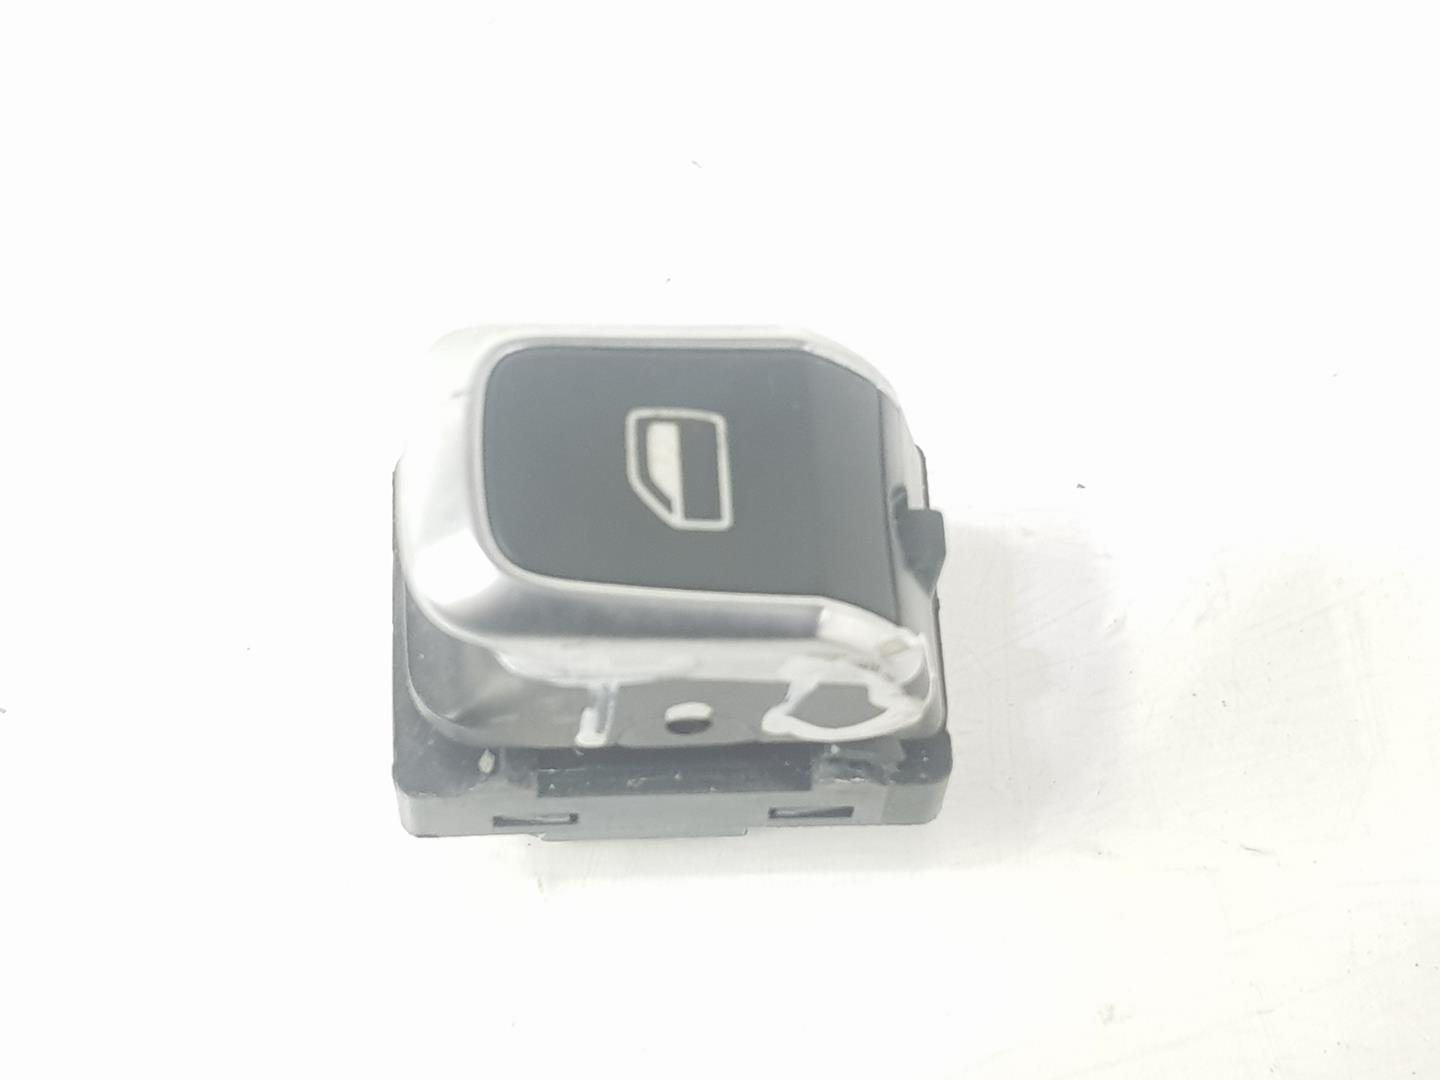 AUDI A7 C7/4G (2010-2020) Rear Right Door Window Control Switch 4H0959855A, 4H0959855A 19761569